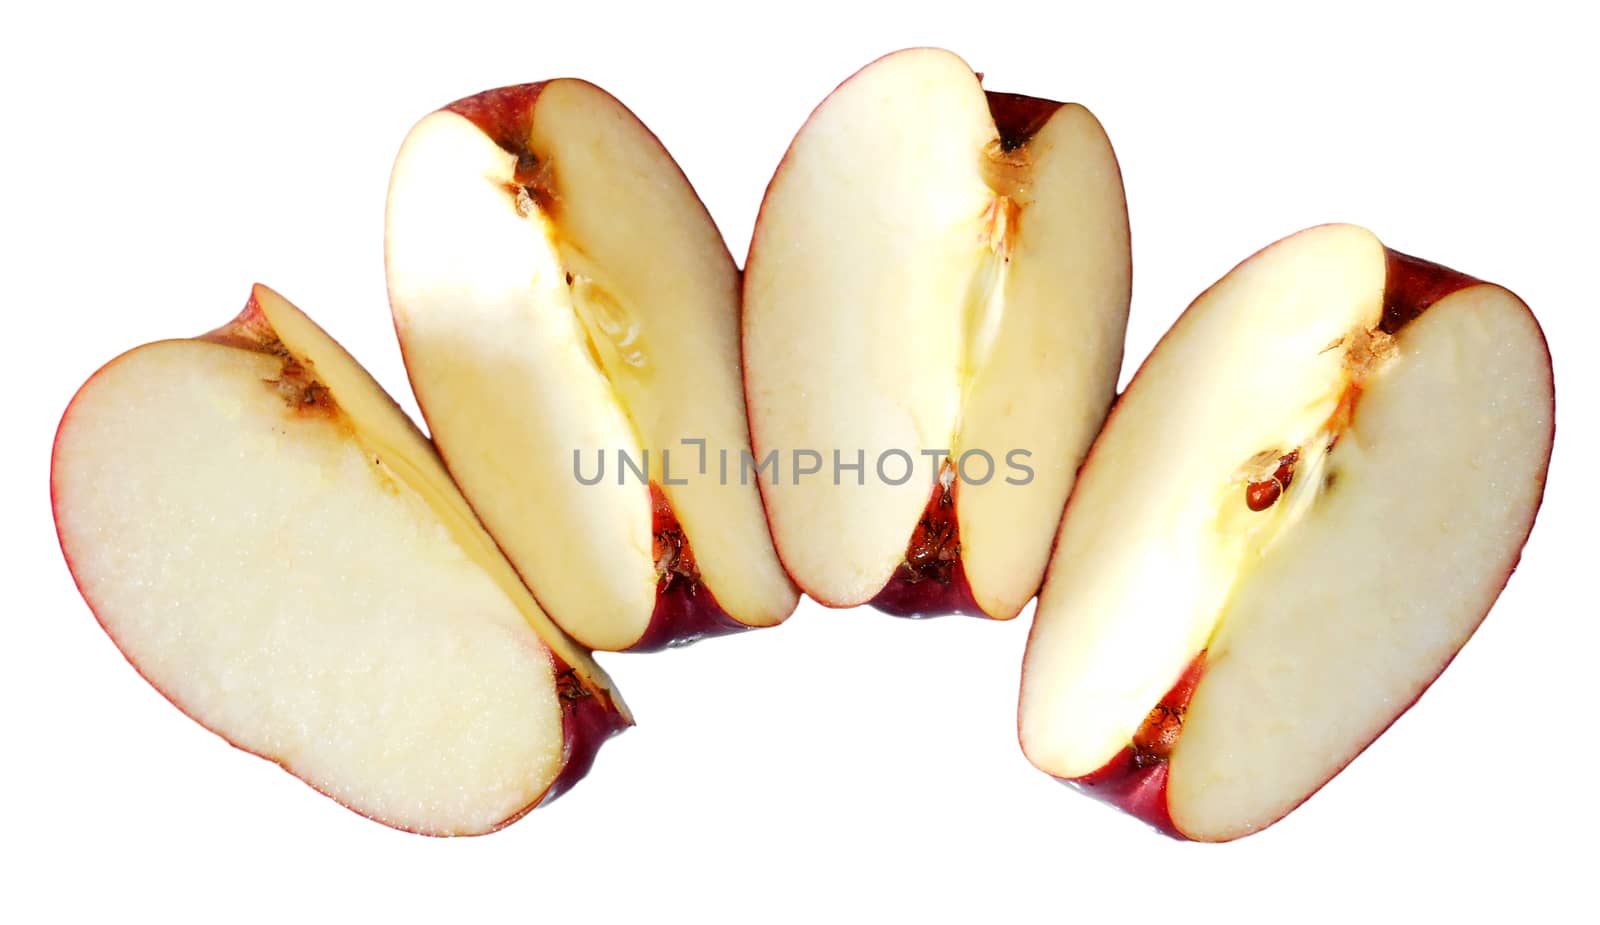 Four quarters of an apple, isolated on white.

Picture taken on November 21, 2014.